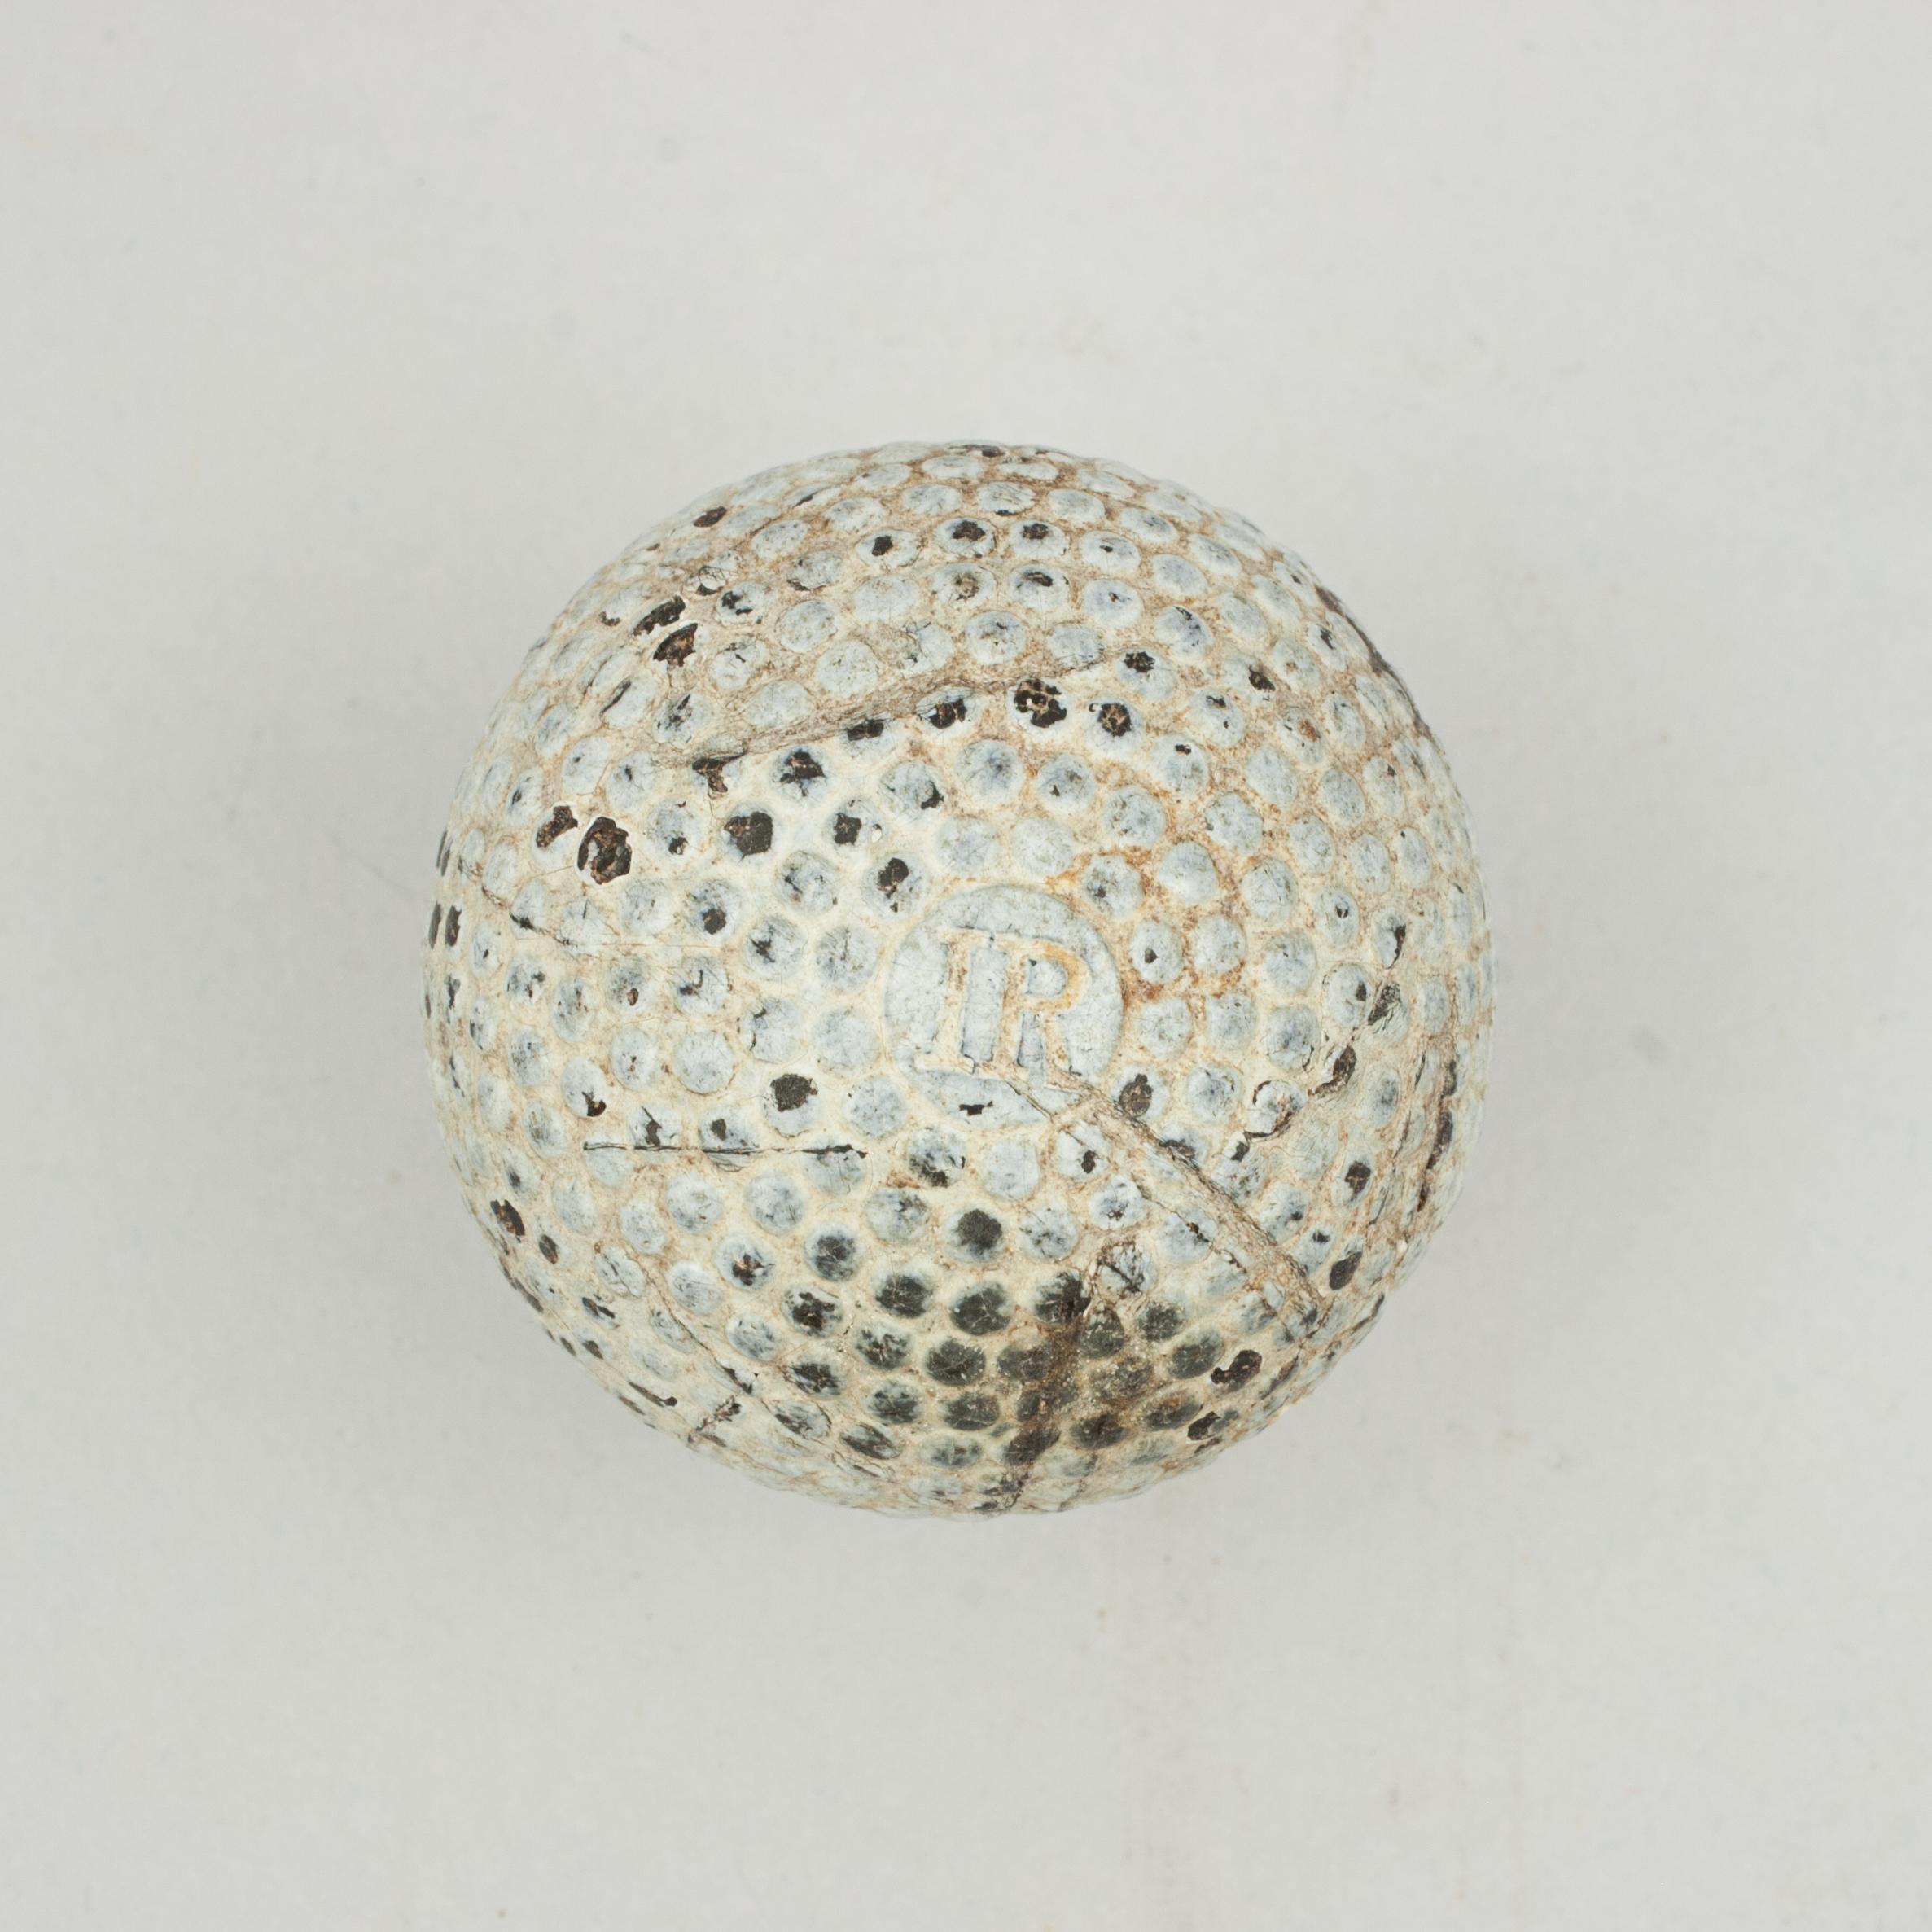 Solid bramble pattern gutty golf ball.
A moulded bramble patterned white gutta percha golf ball in original condition. The 1890's Gutty ball still has most of the white paint but is with some surface marks. The ball is marked 'IR' on both poles and